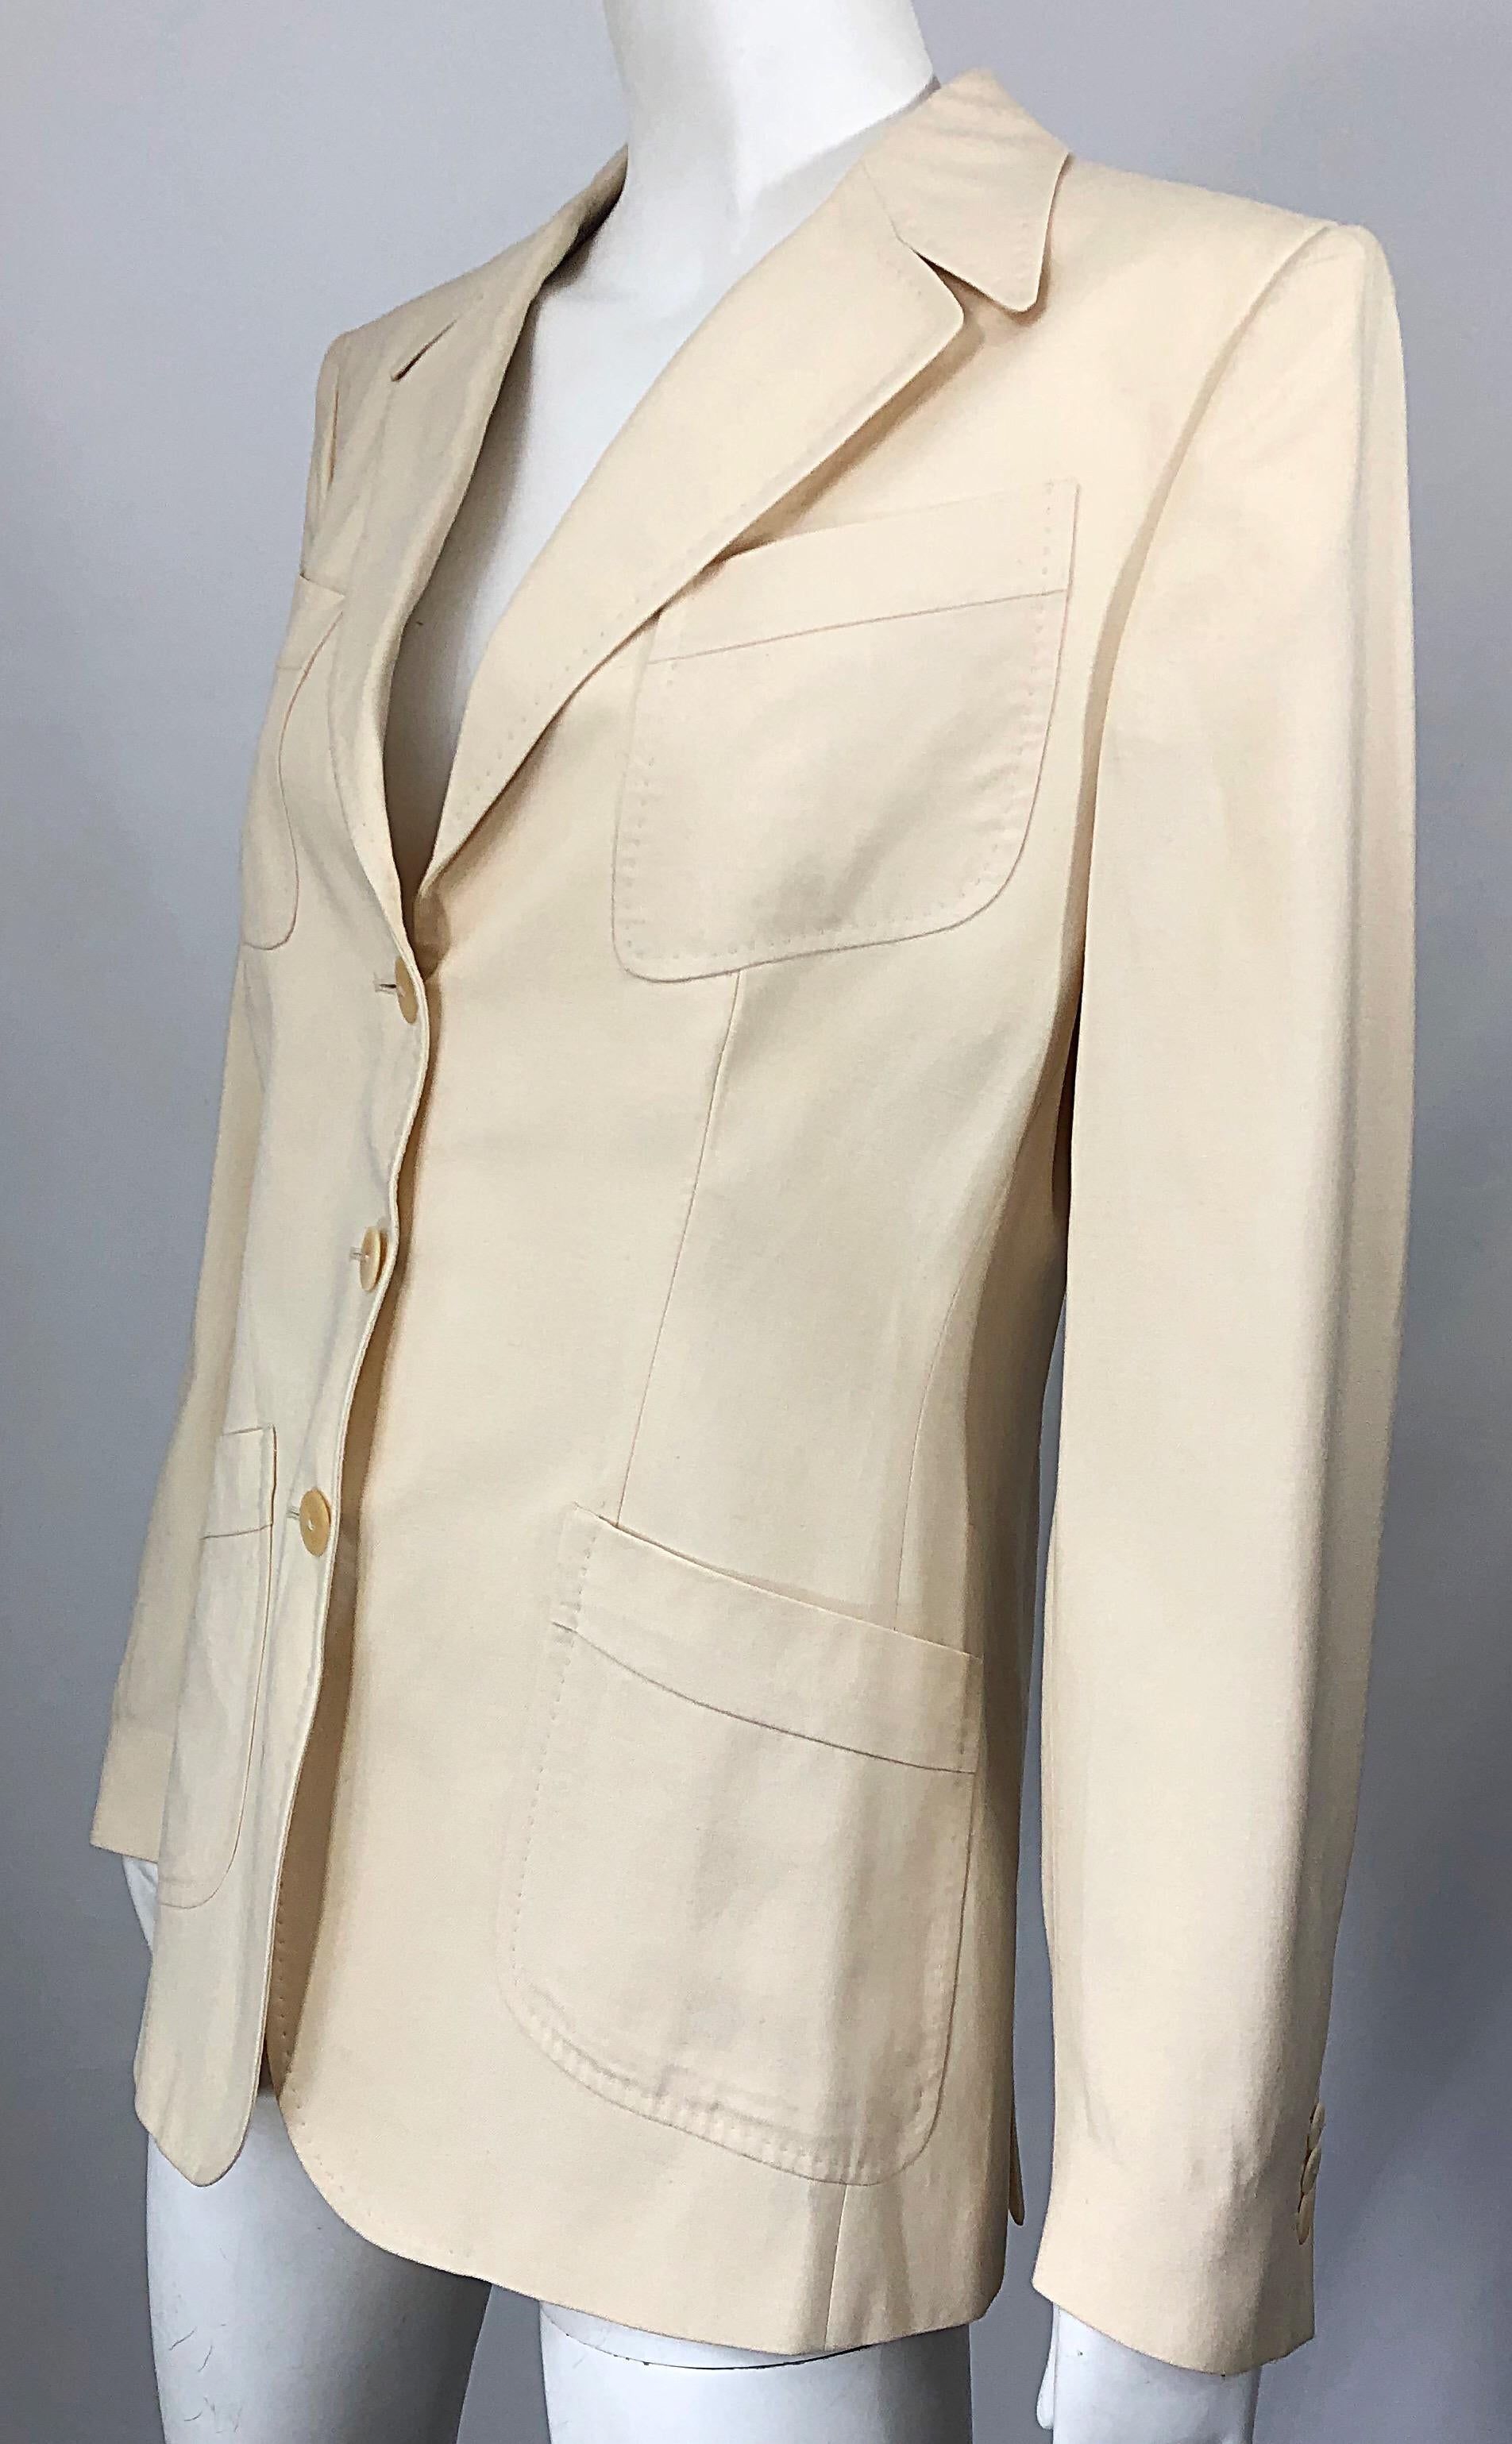 Vintage Thierry Mugler Couture 1990s Size 40 / US 8 Ivory Silk 90s Blazer Jacket For Sale 2